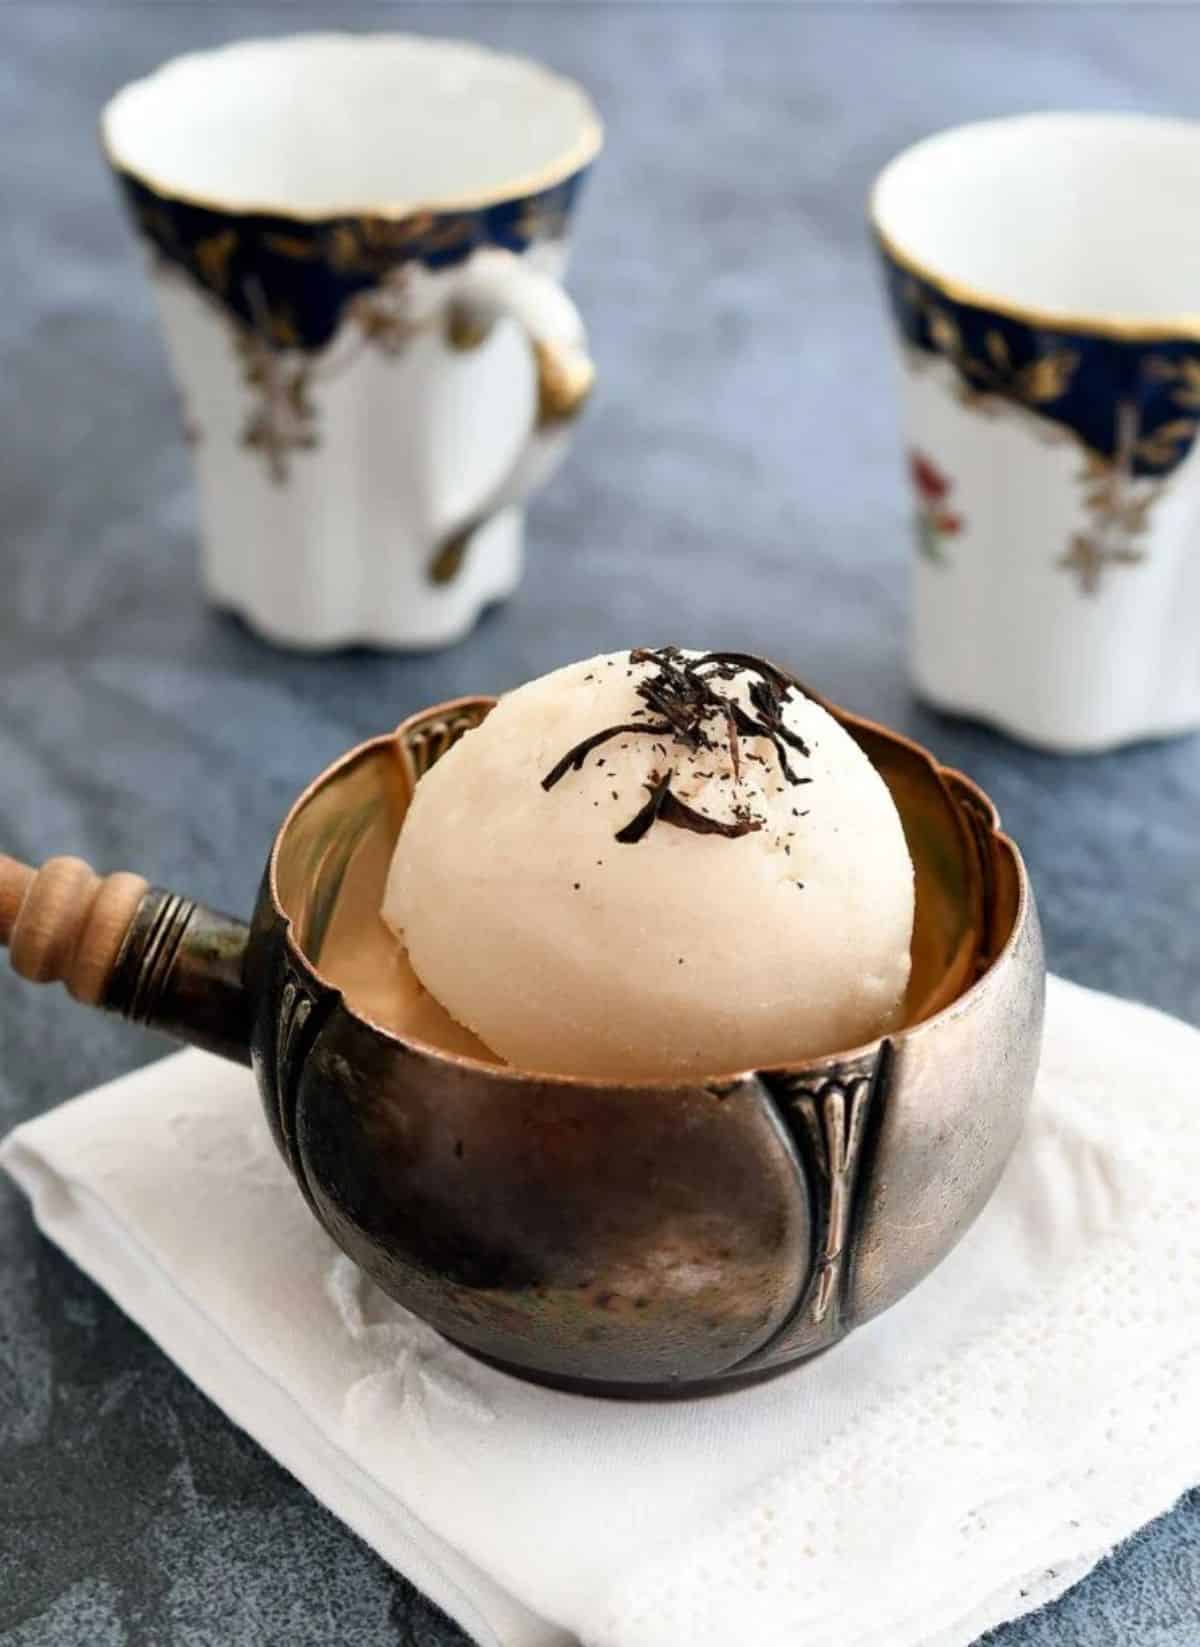 Plant-based London Fog Ice Cream in a small bowl.